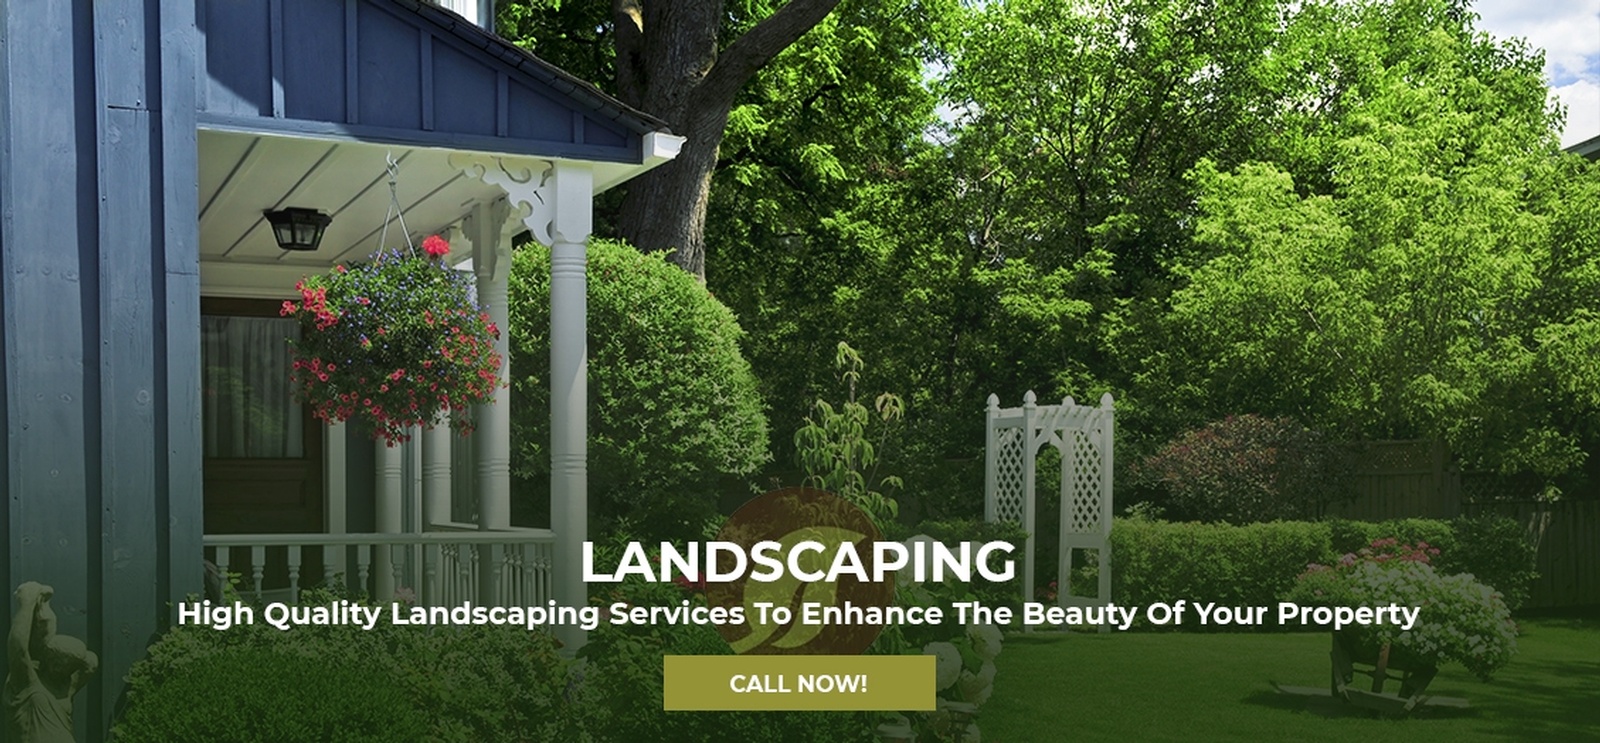 Quality Landscaping Services